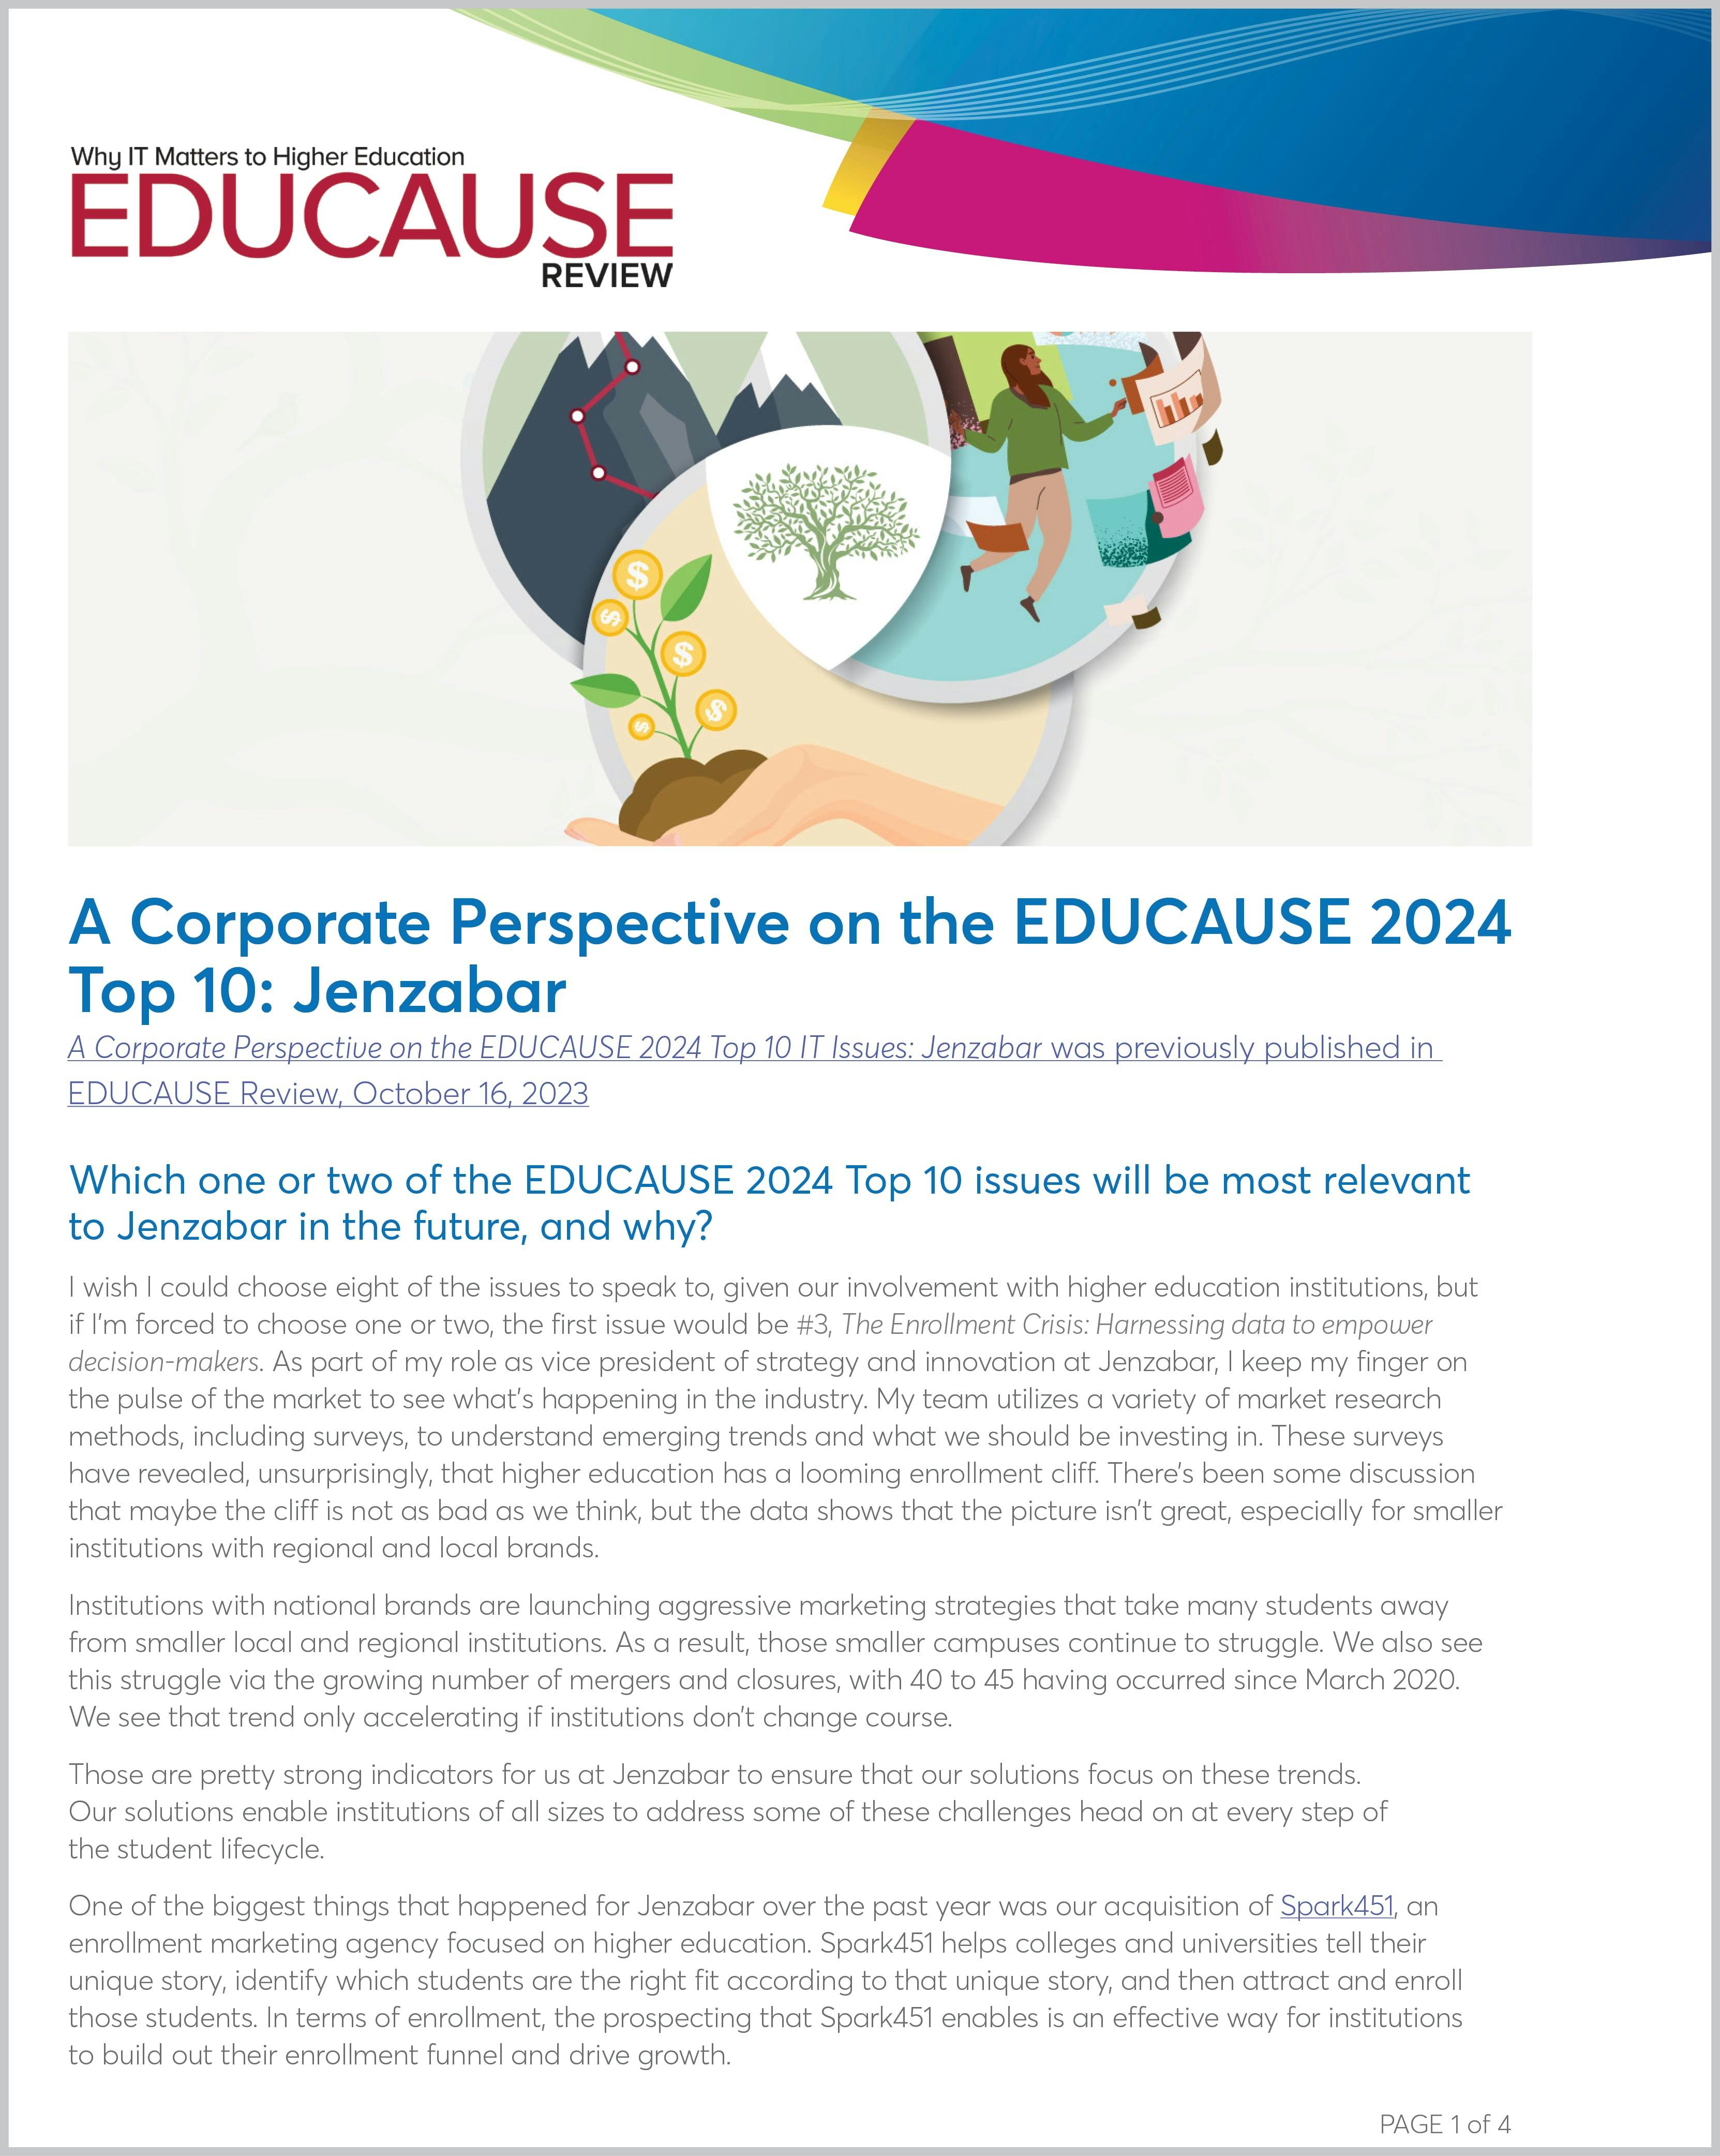 A Corporate Perspective on the EDUCAUSE 2024 Top 10